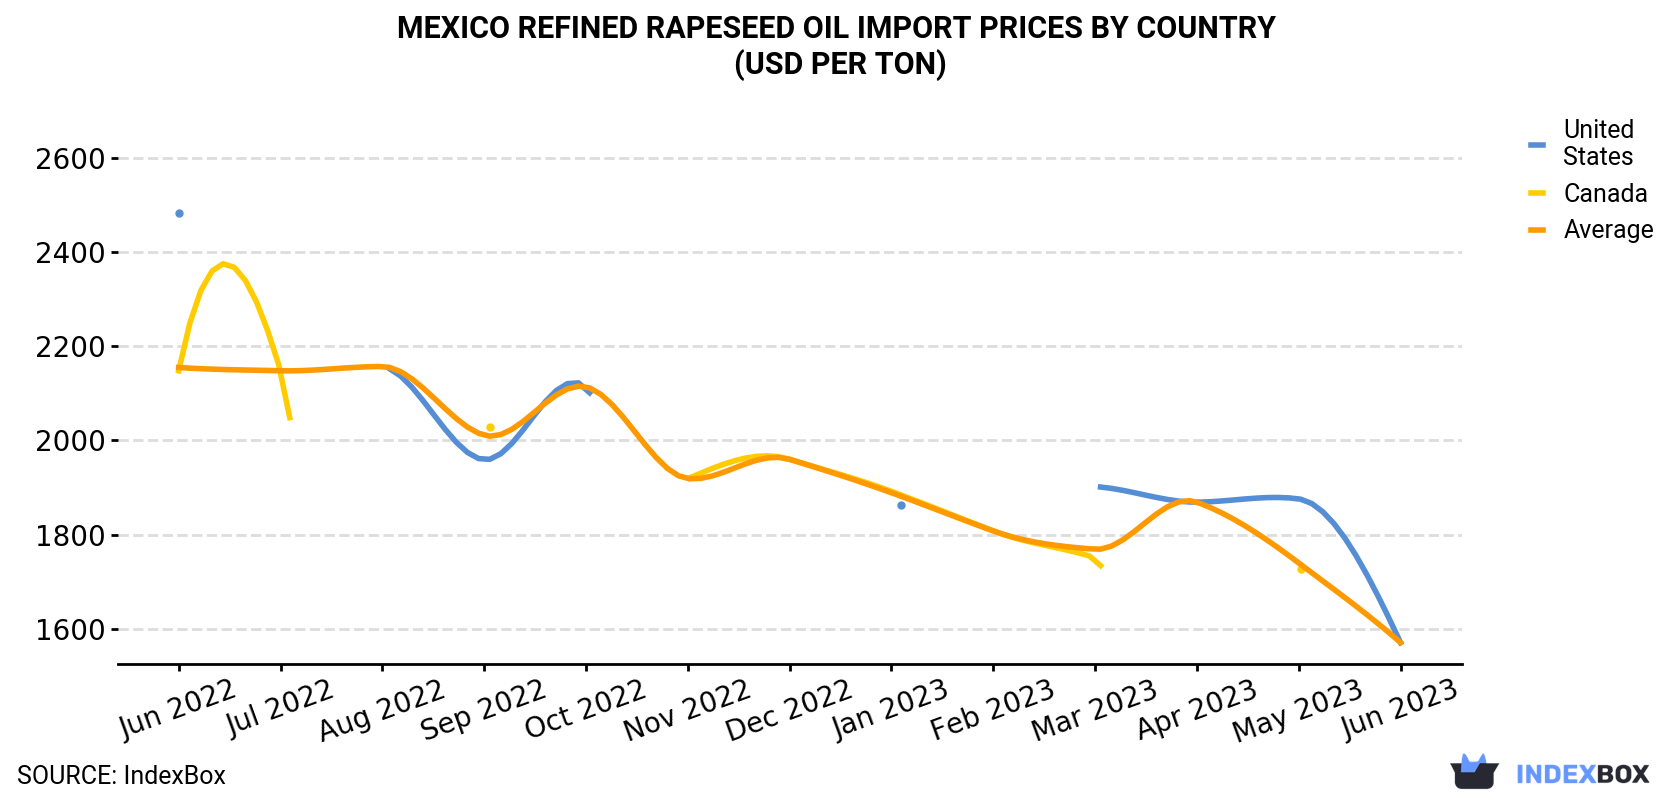 Mexico Refined Rapeseed Oil Import Prices By Country (USD Per Ton)